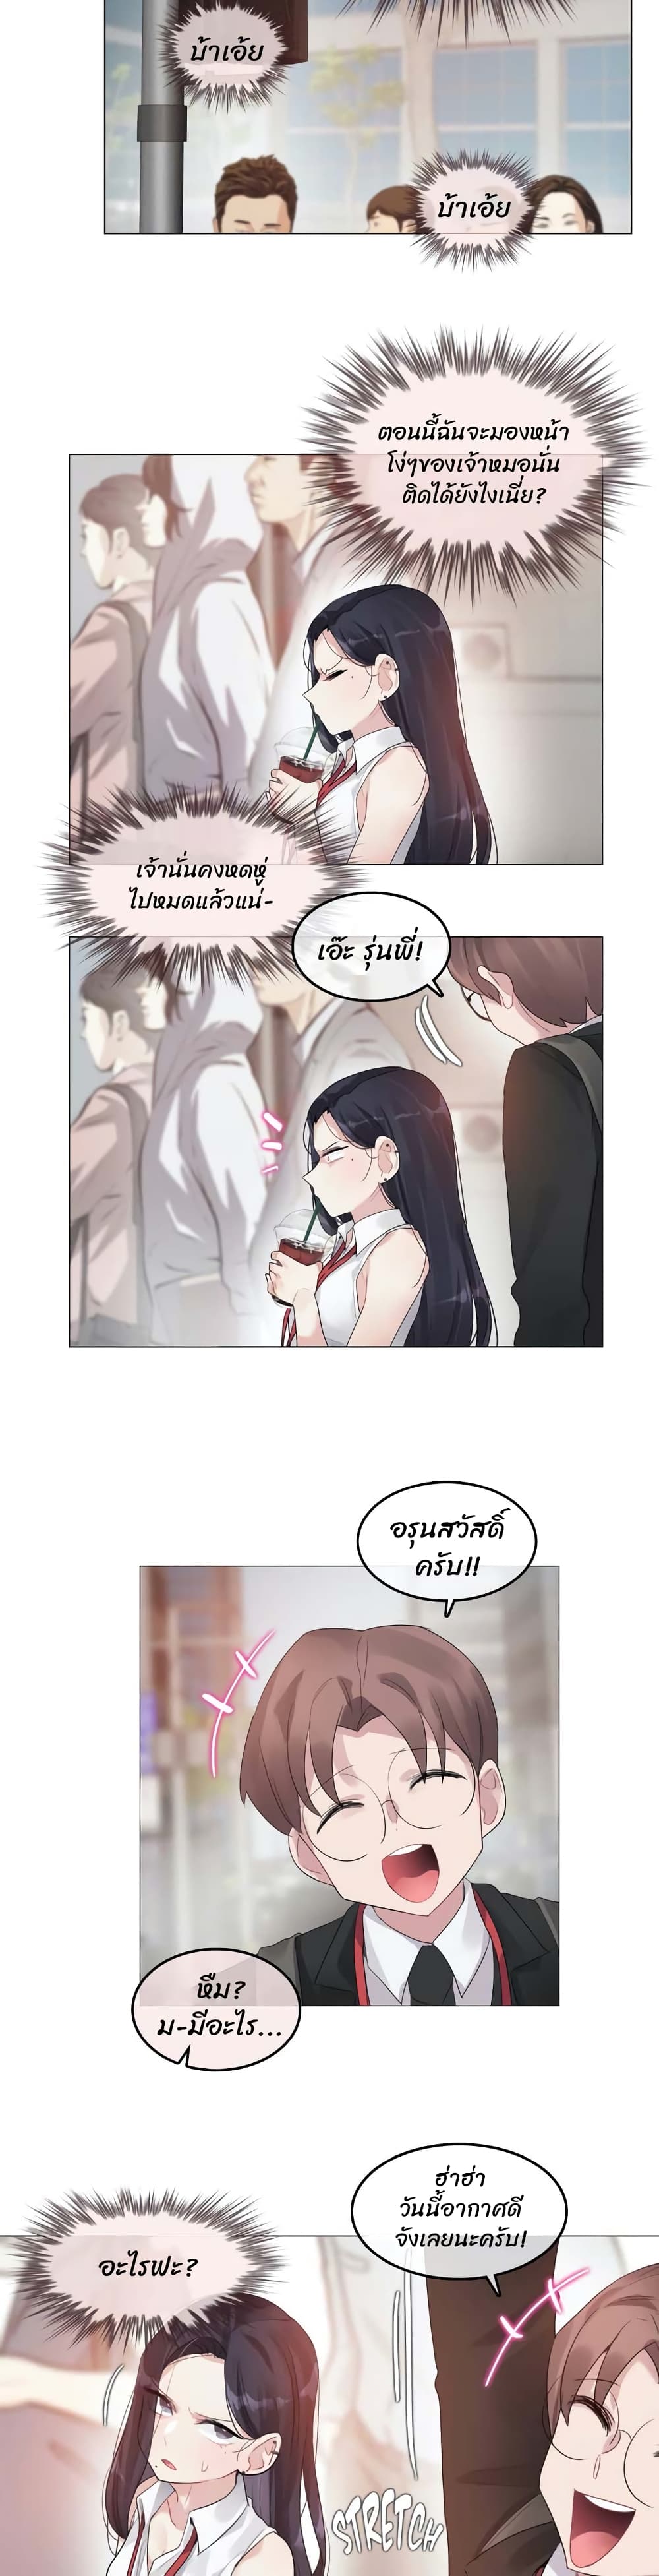 A Pervert's Daily Life 96 (3)